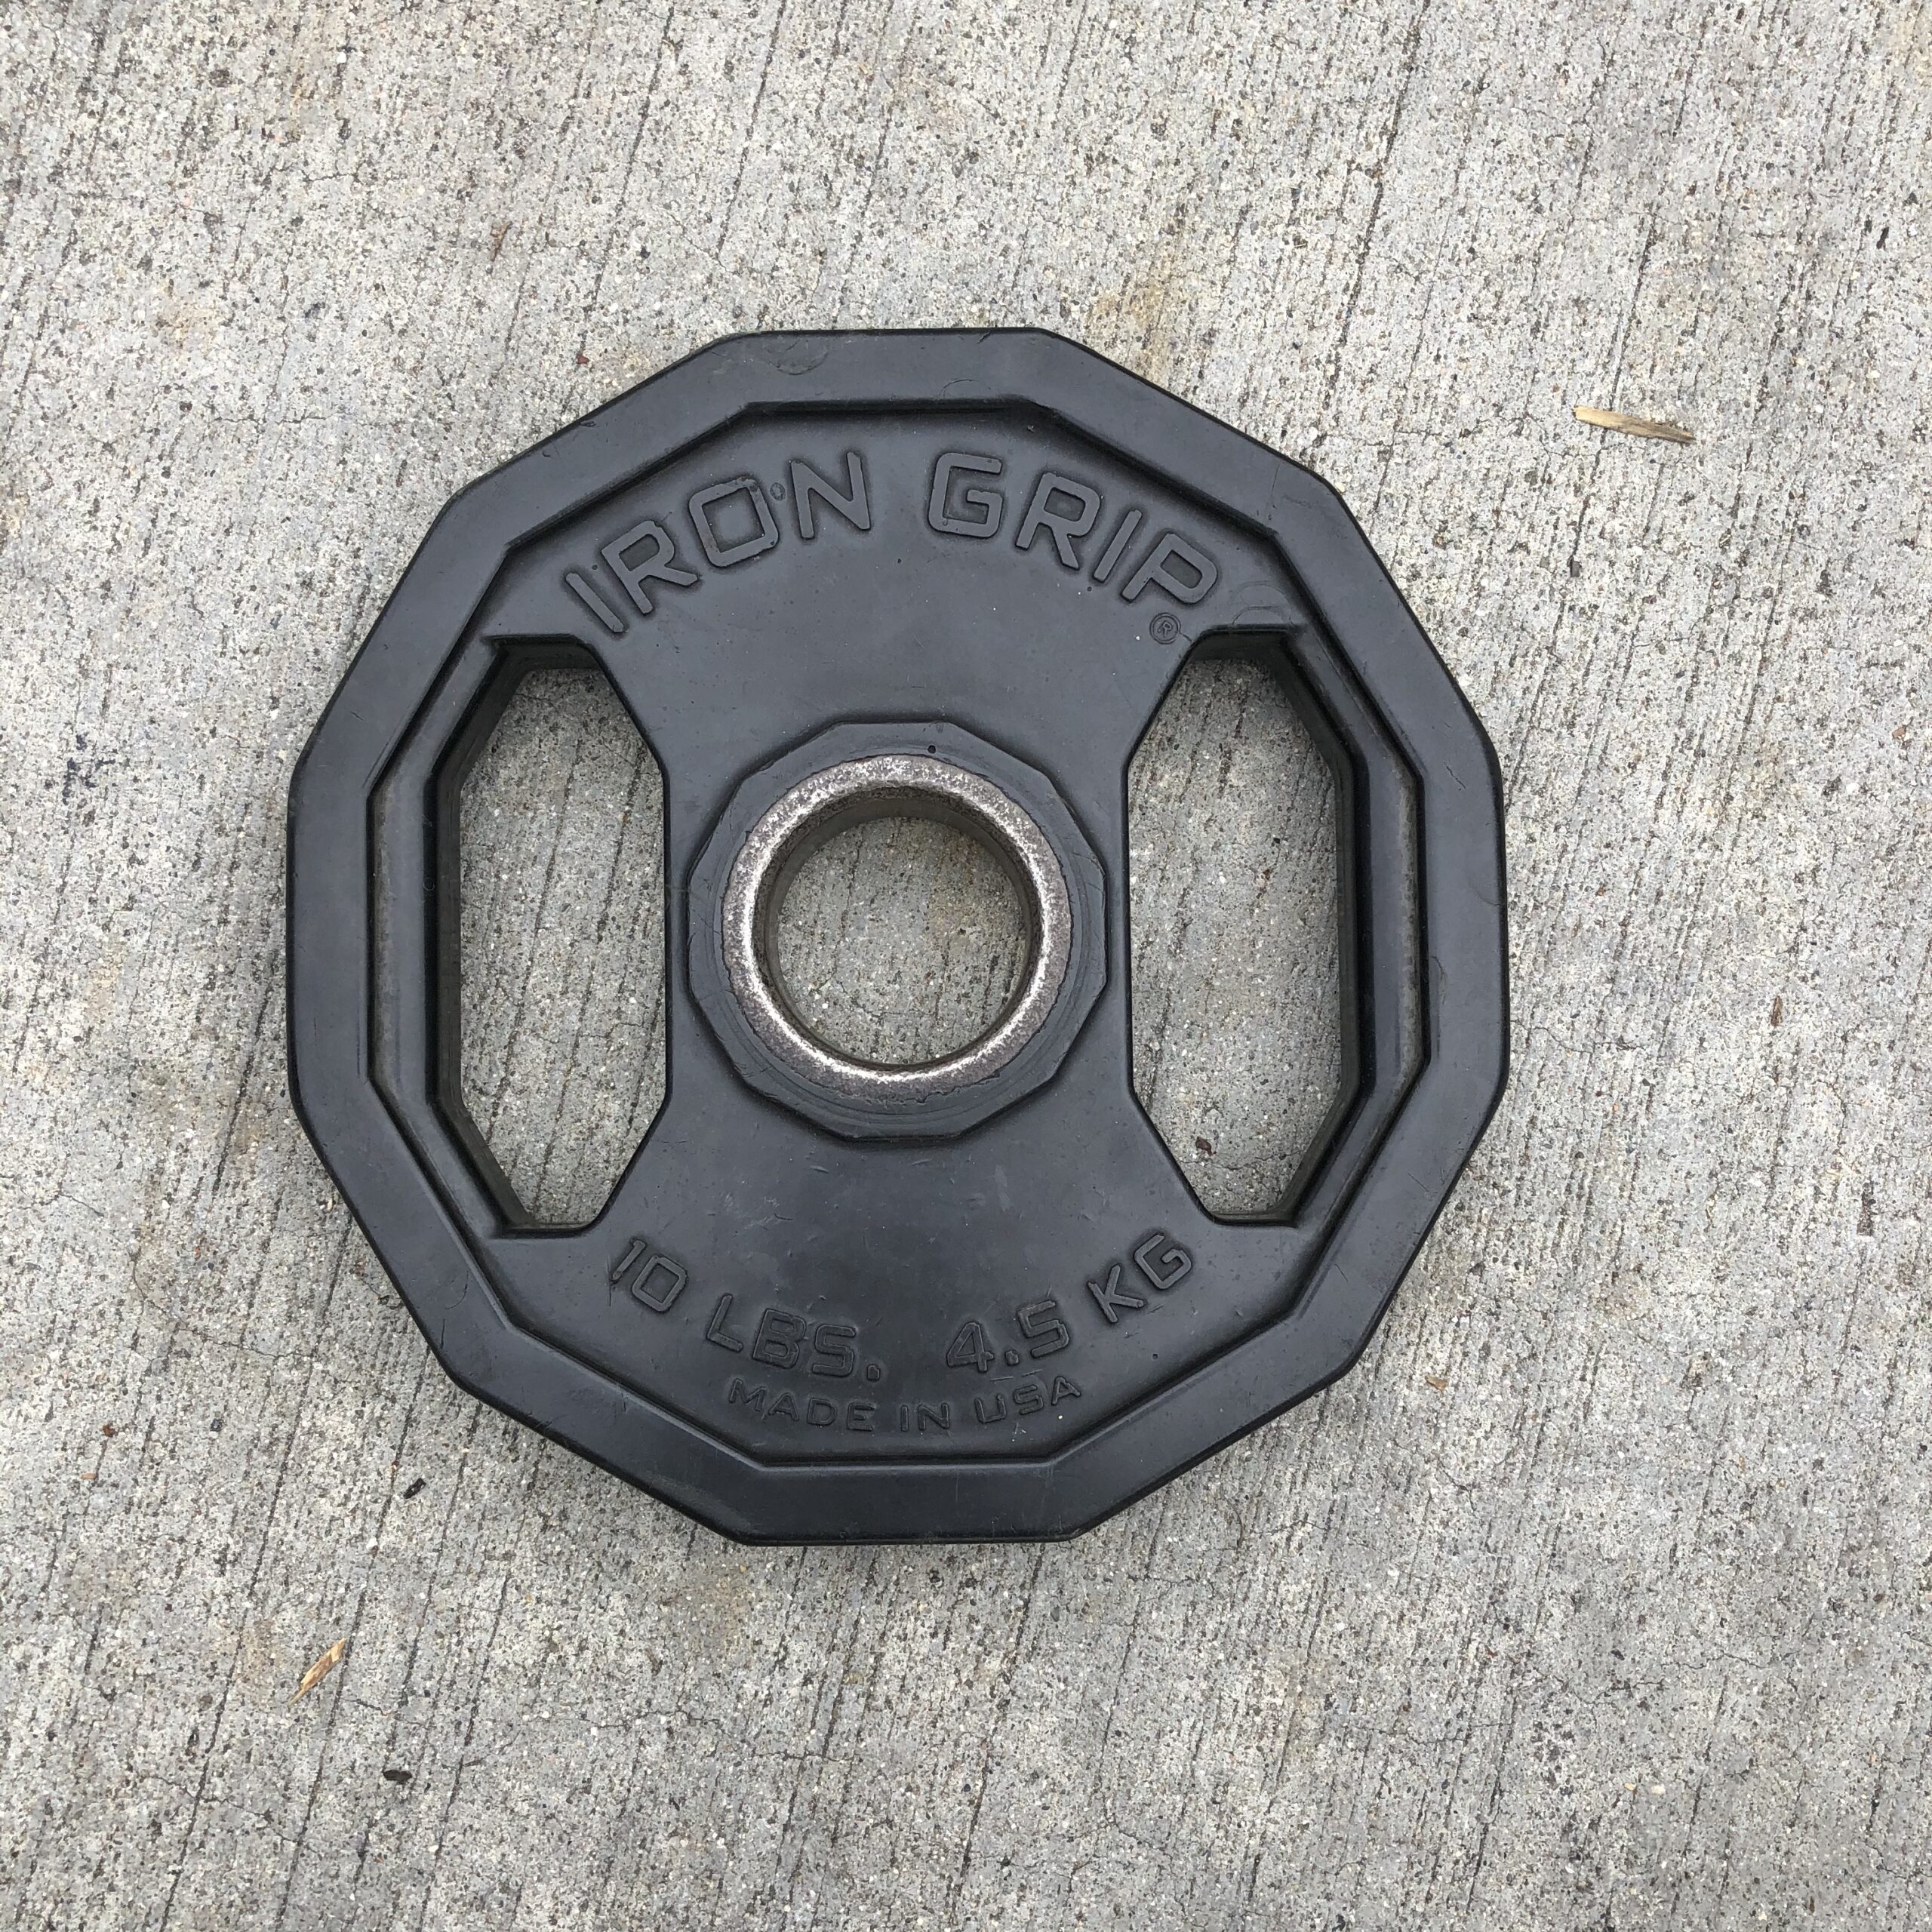 https://primofitnessusa.com/wp-content/uploads/2020/06/Iron-Grip-Rubber-Plate-10lbs-scaled.jpg